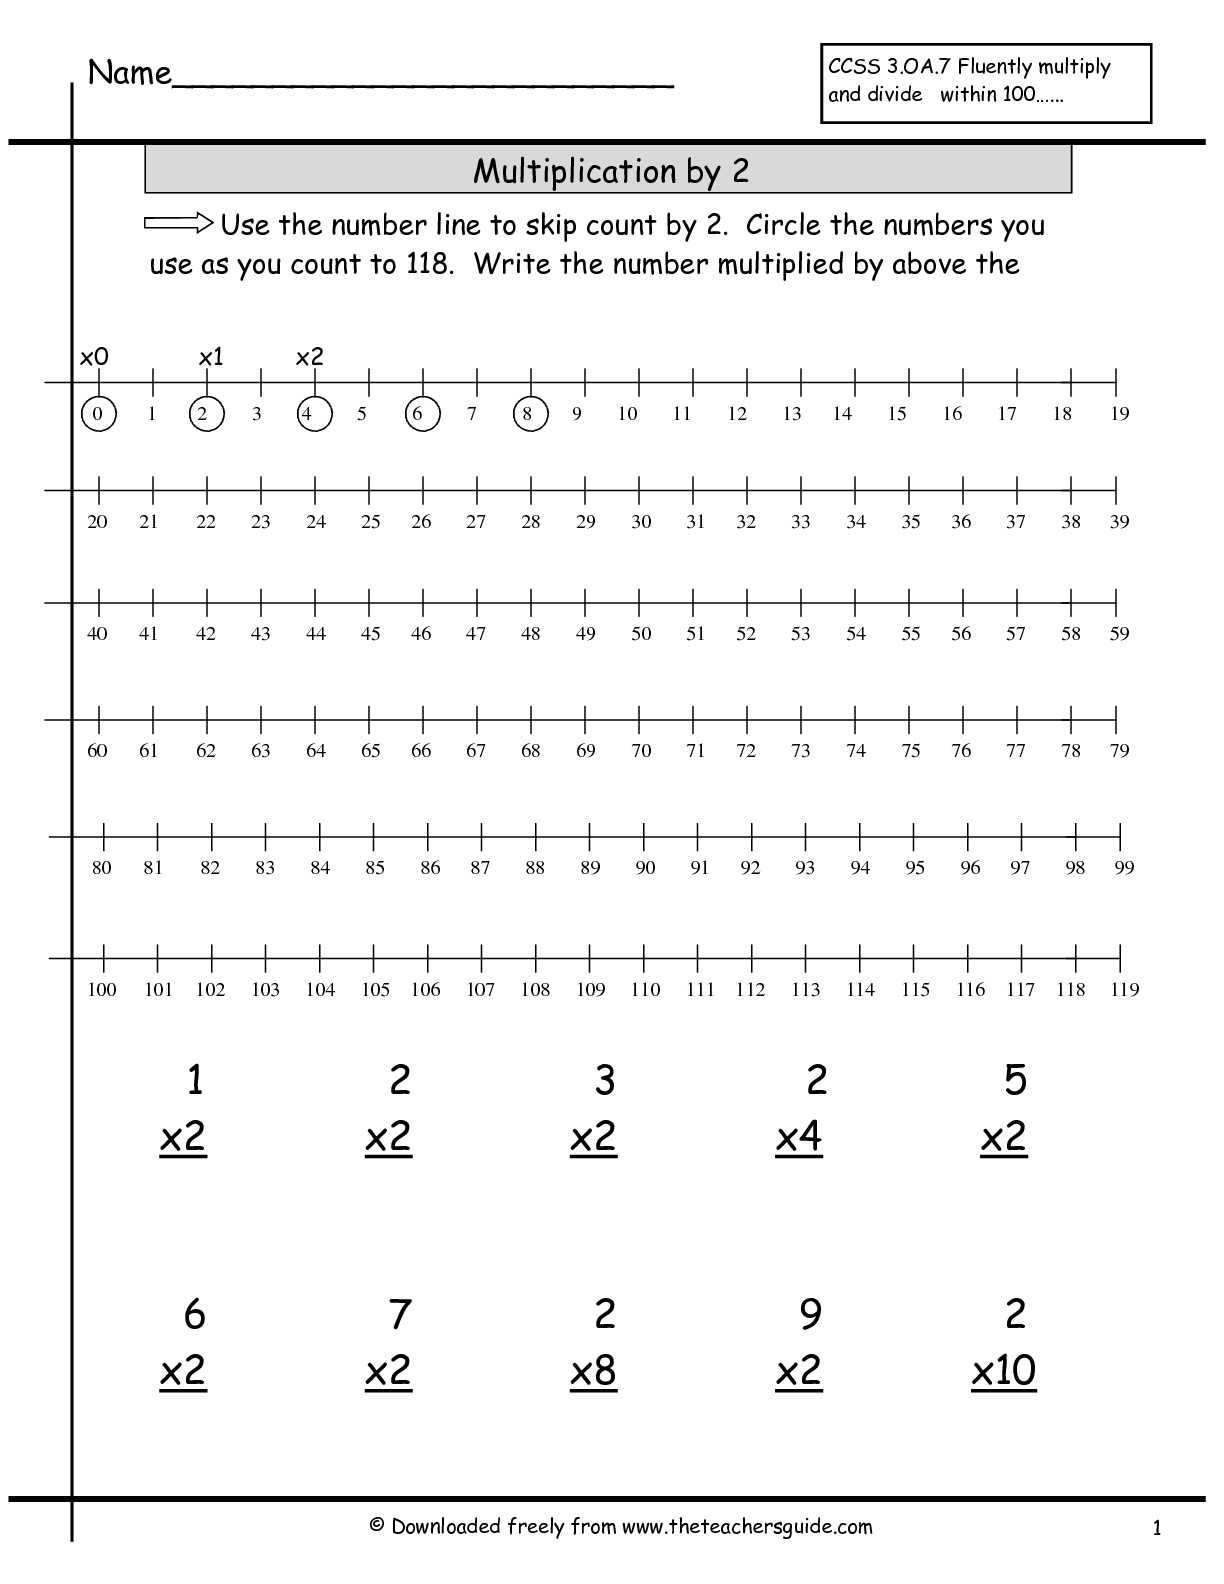 Multiplication Facts Worksheets From The Teacher's Guide with Printable Multiplication Worksheet 0 And 1